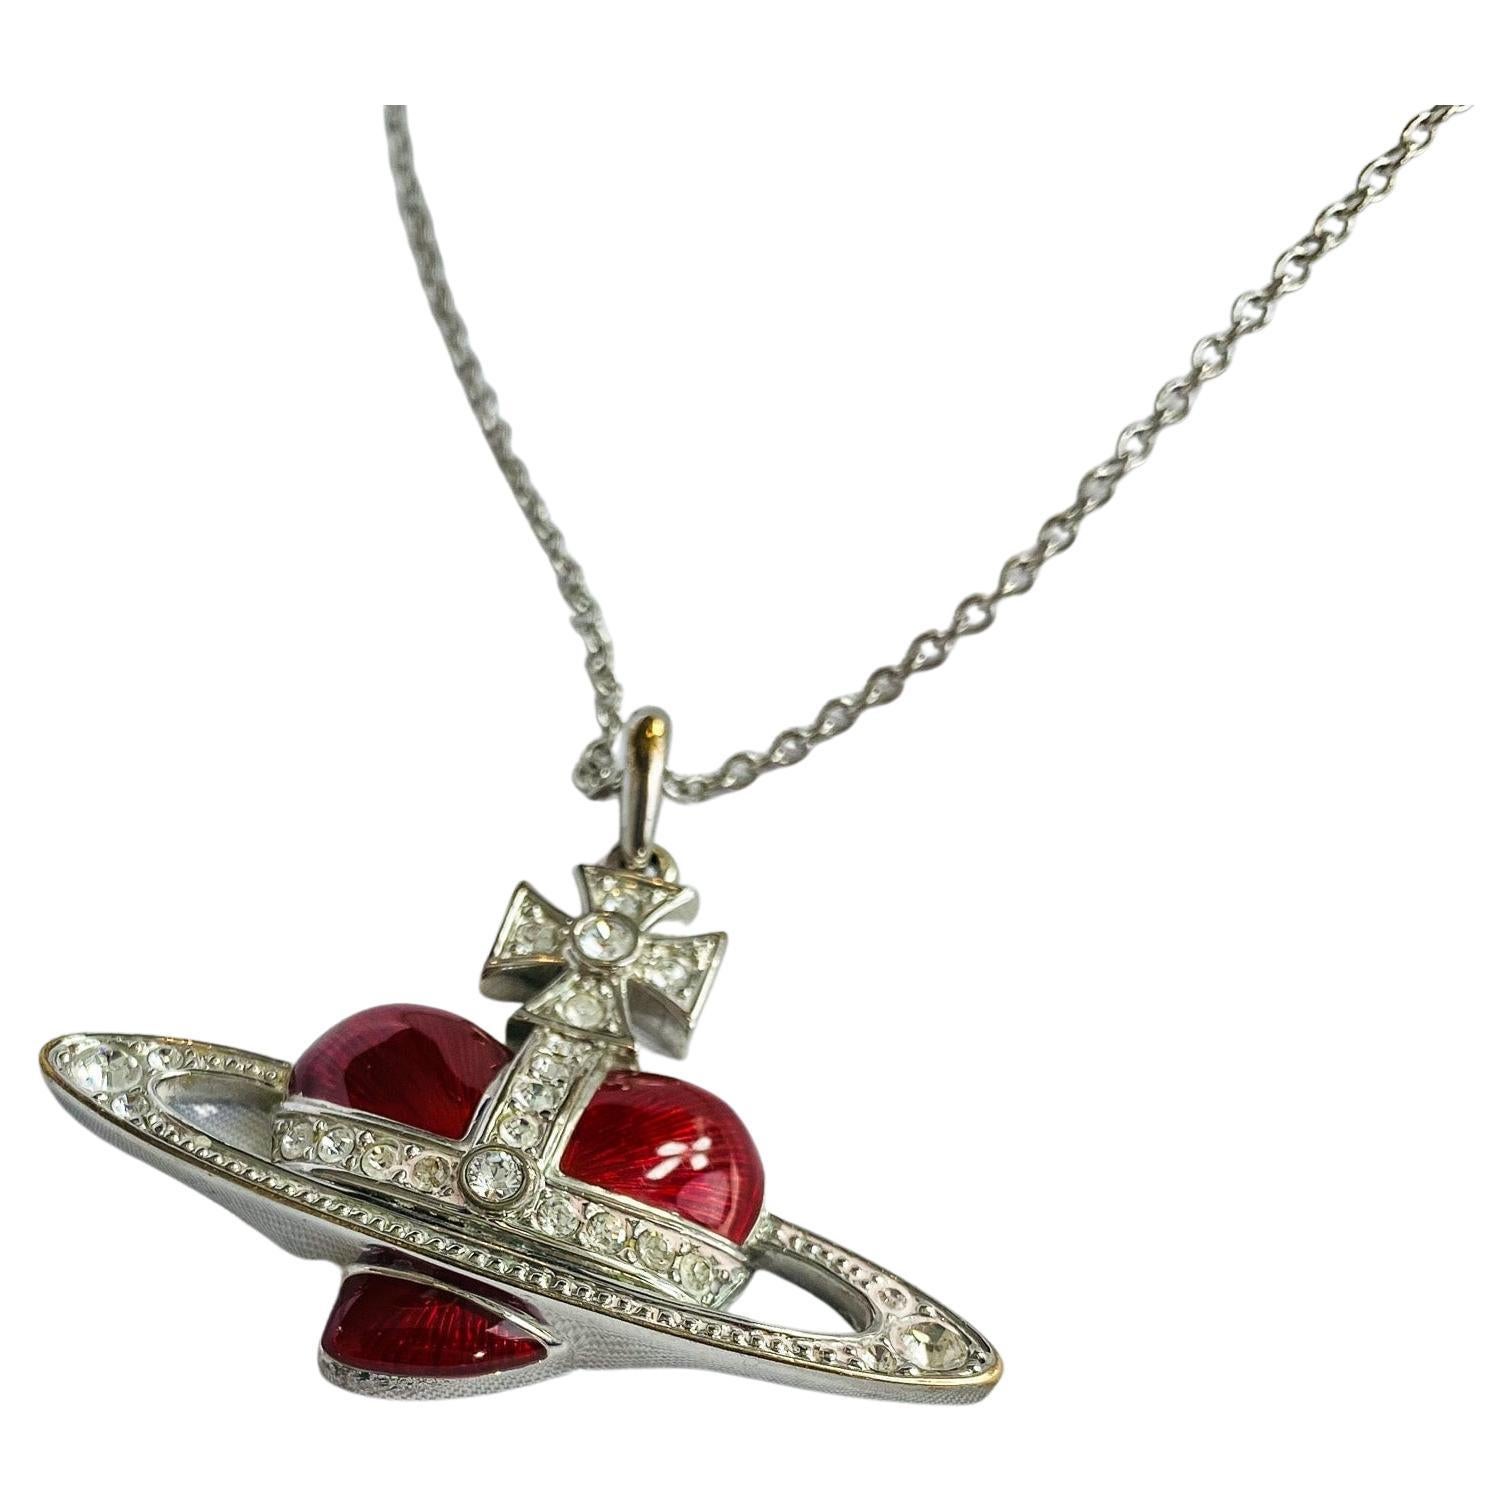 Vivienne Westwood Pendant Necklace - Silver Plated